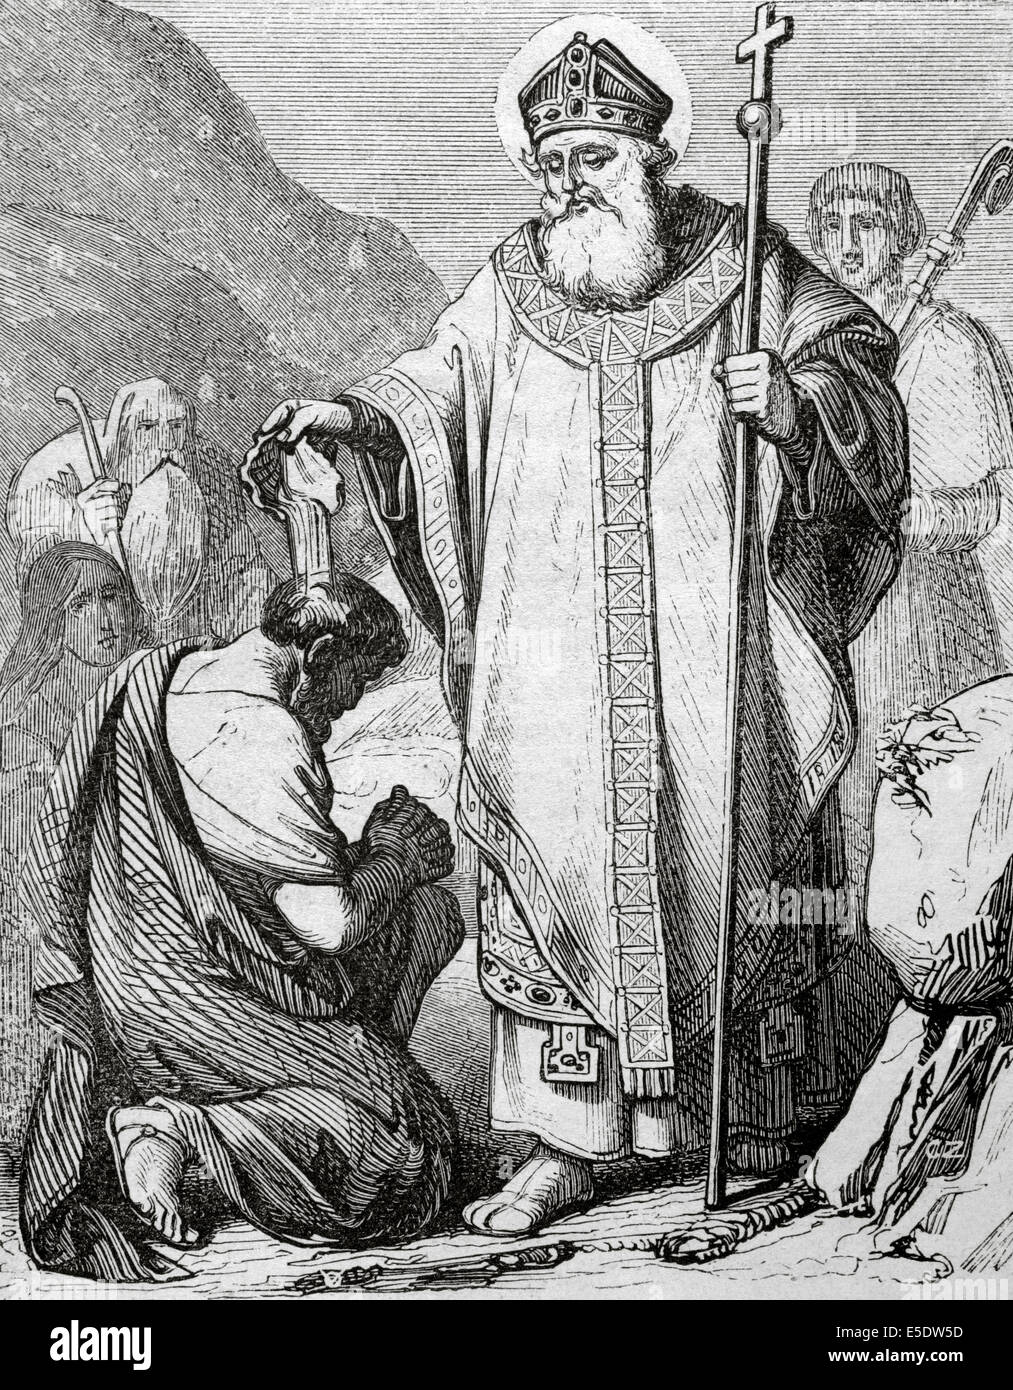 Saint Martial was the first bishop of Limoges in today's France. Died 1st or 3rd centuries. Engraving by Capuz. Stock Photo